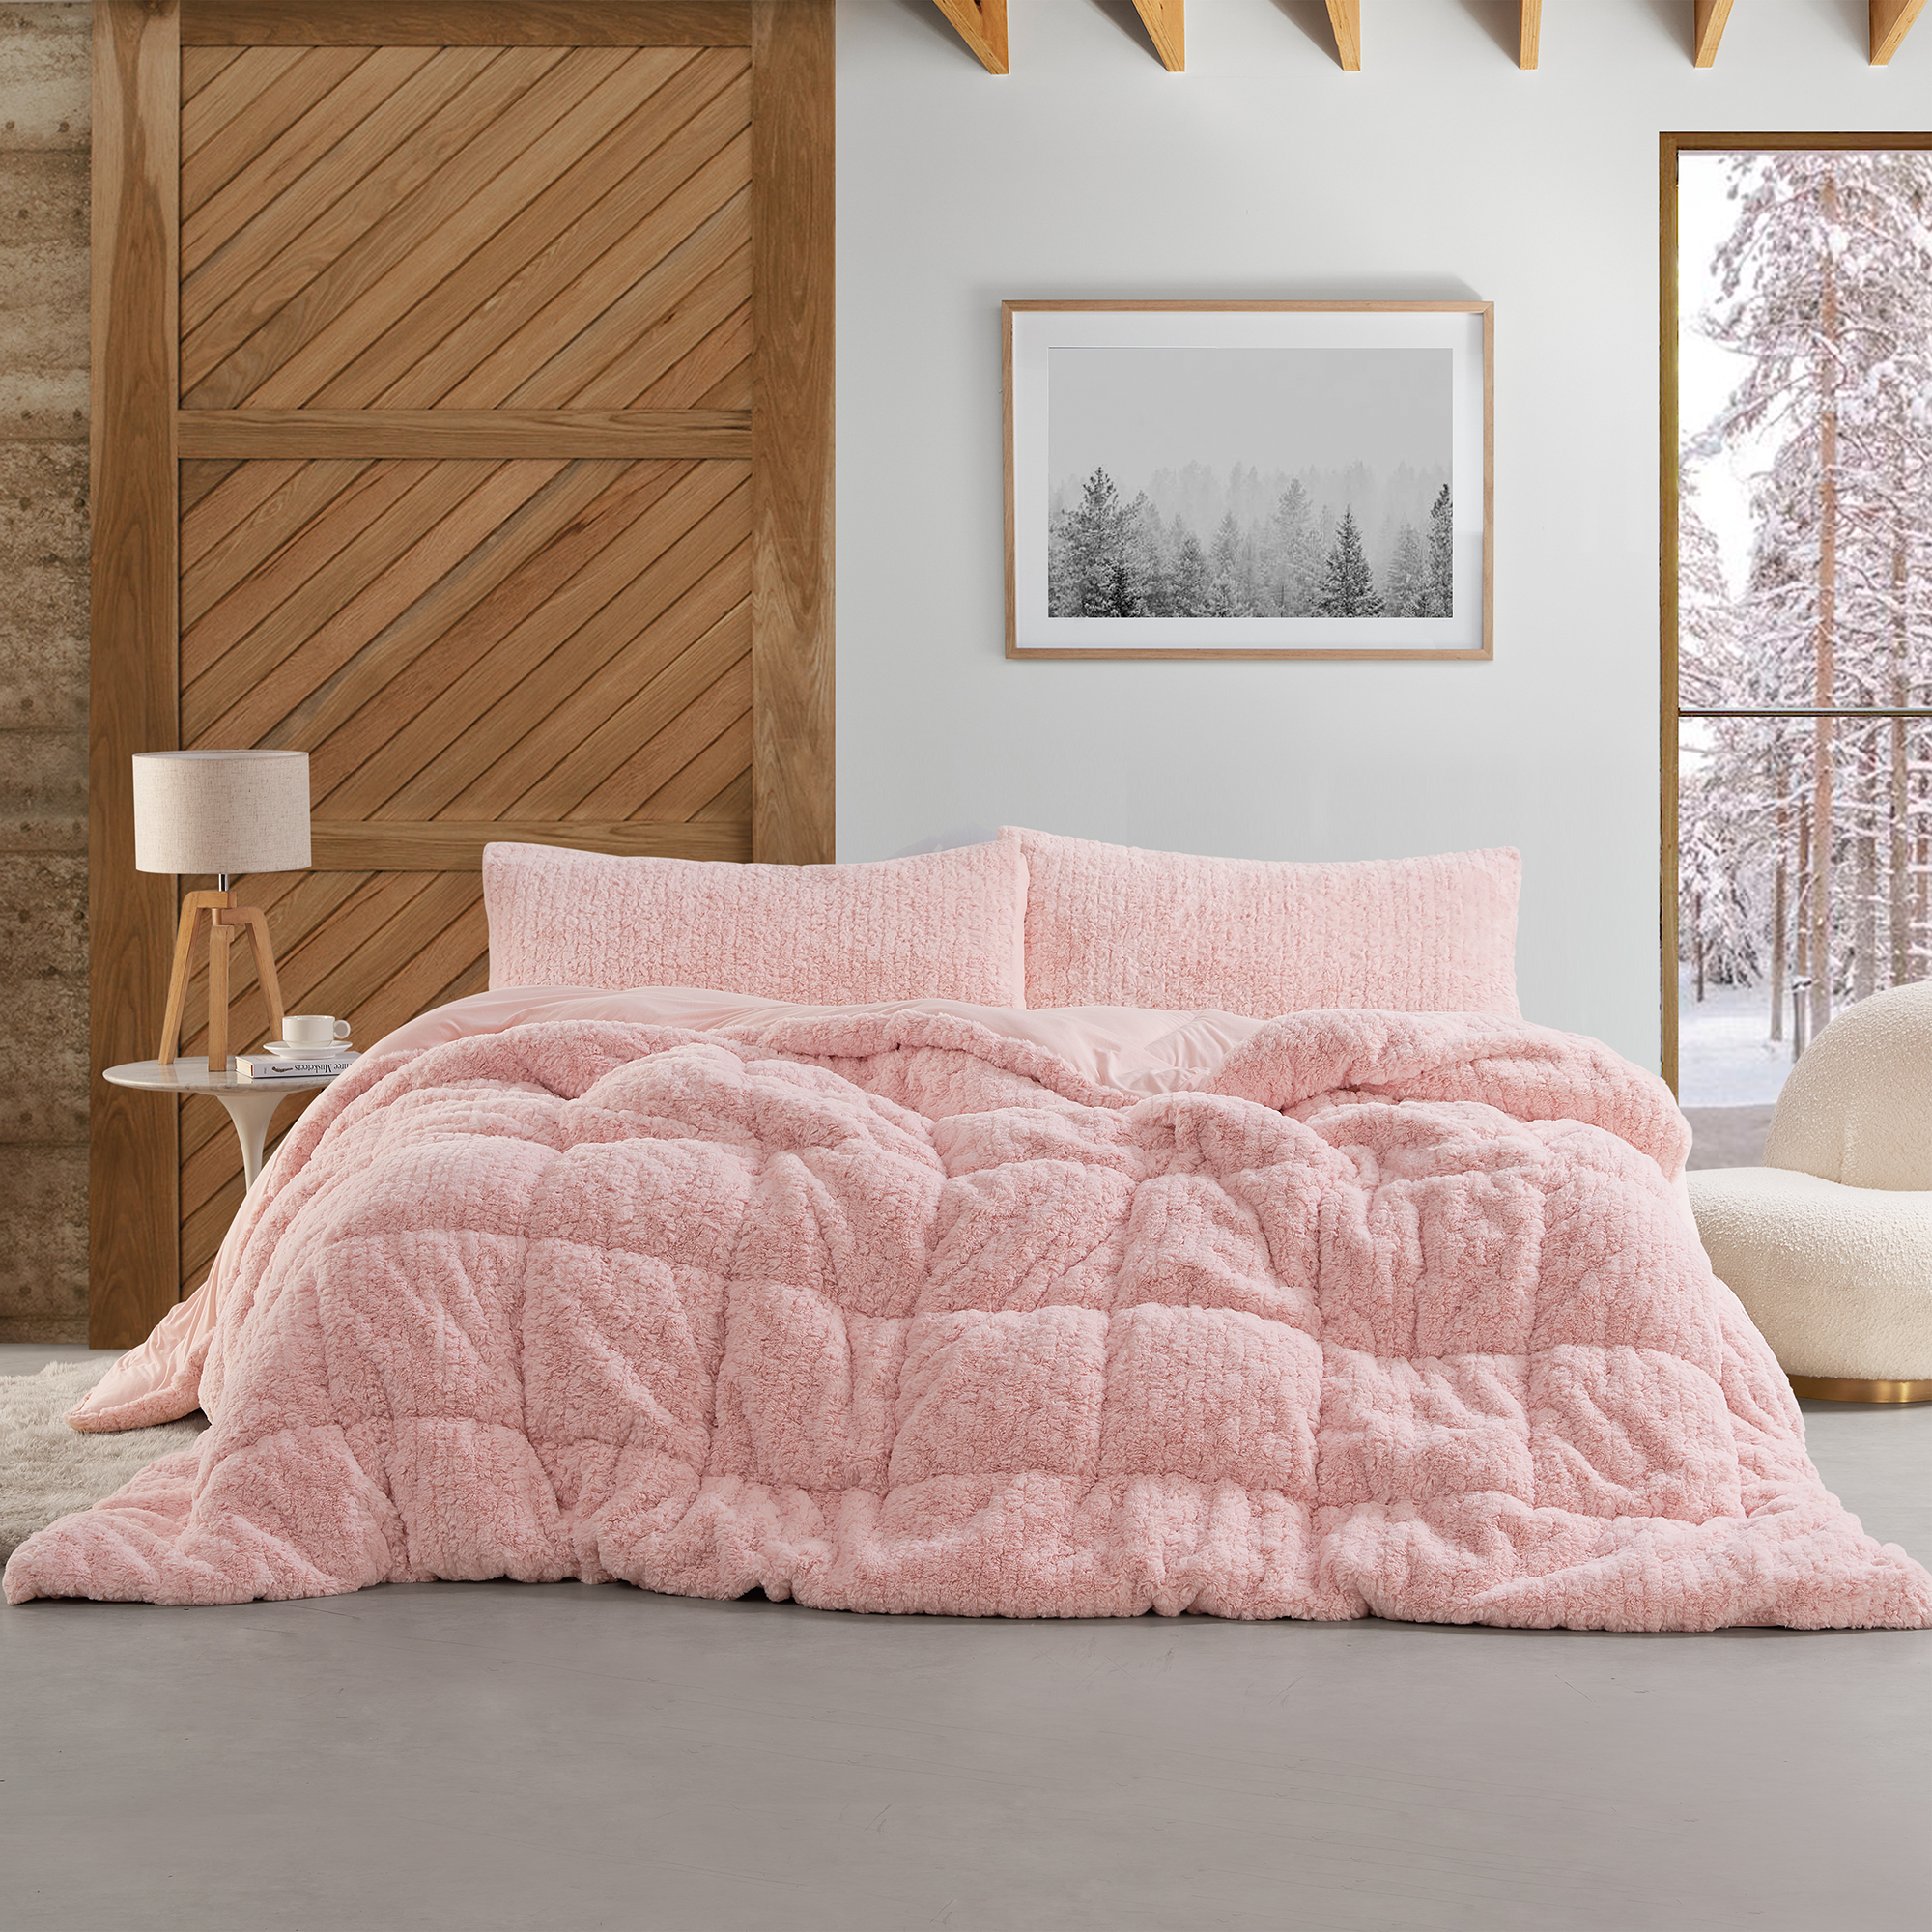 Truth Be Told - Coma Inducer® King Comforter - Rose Taupe